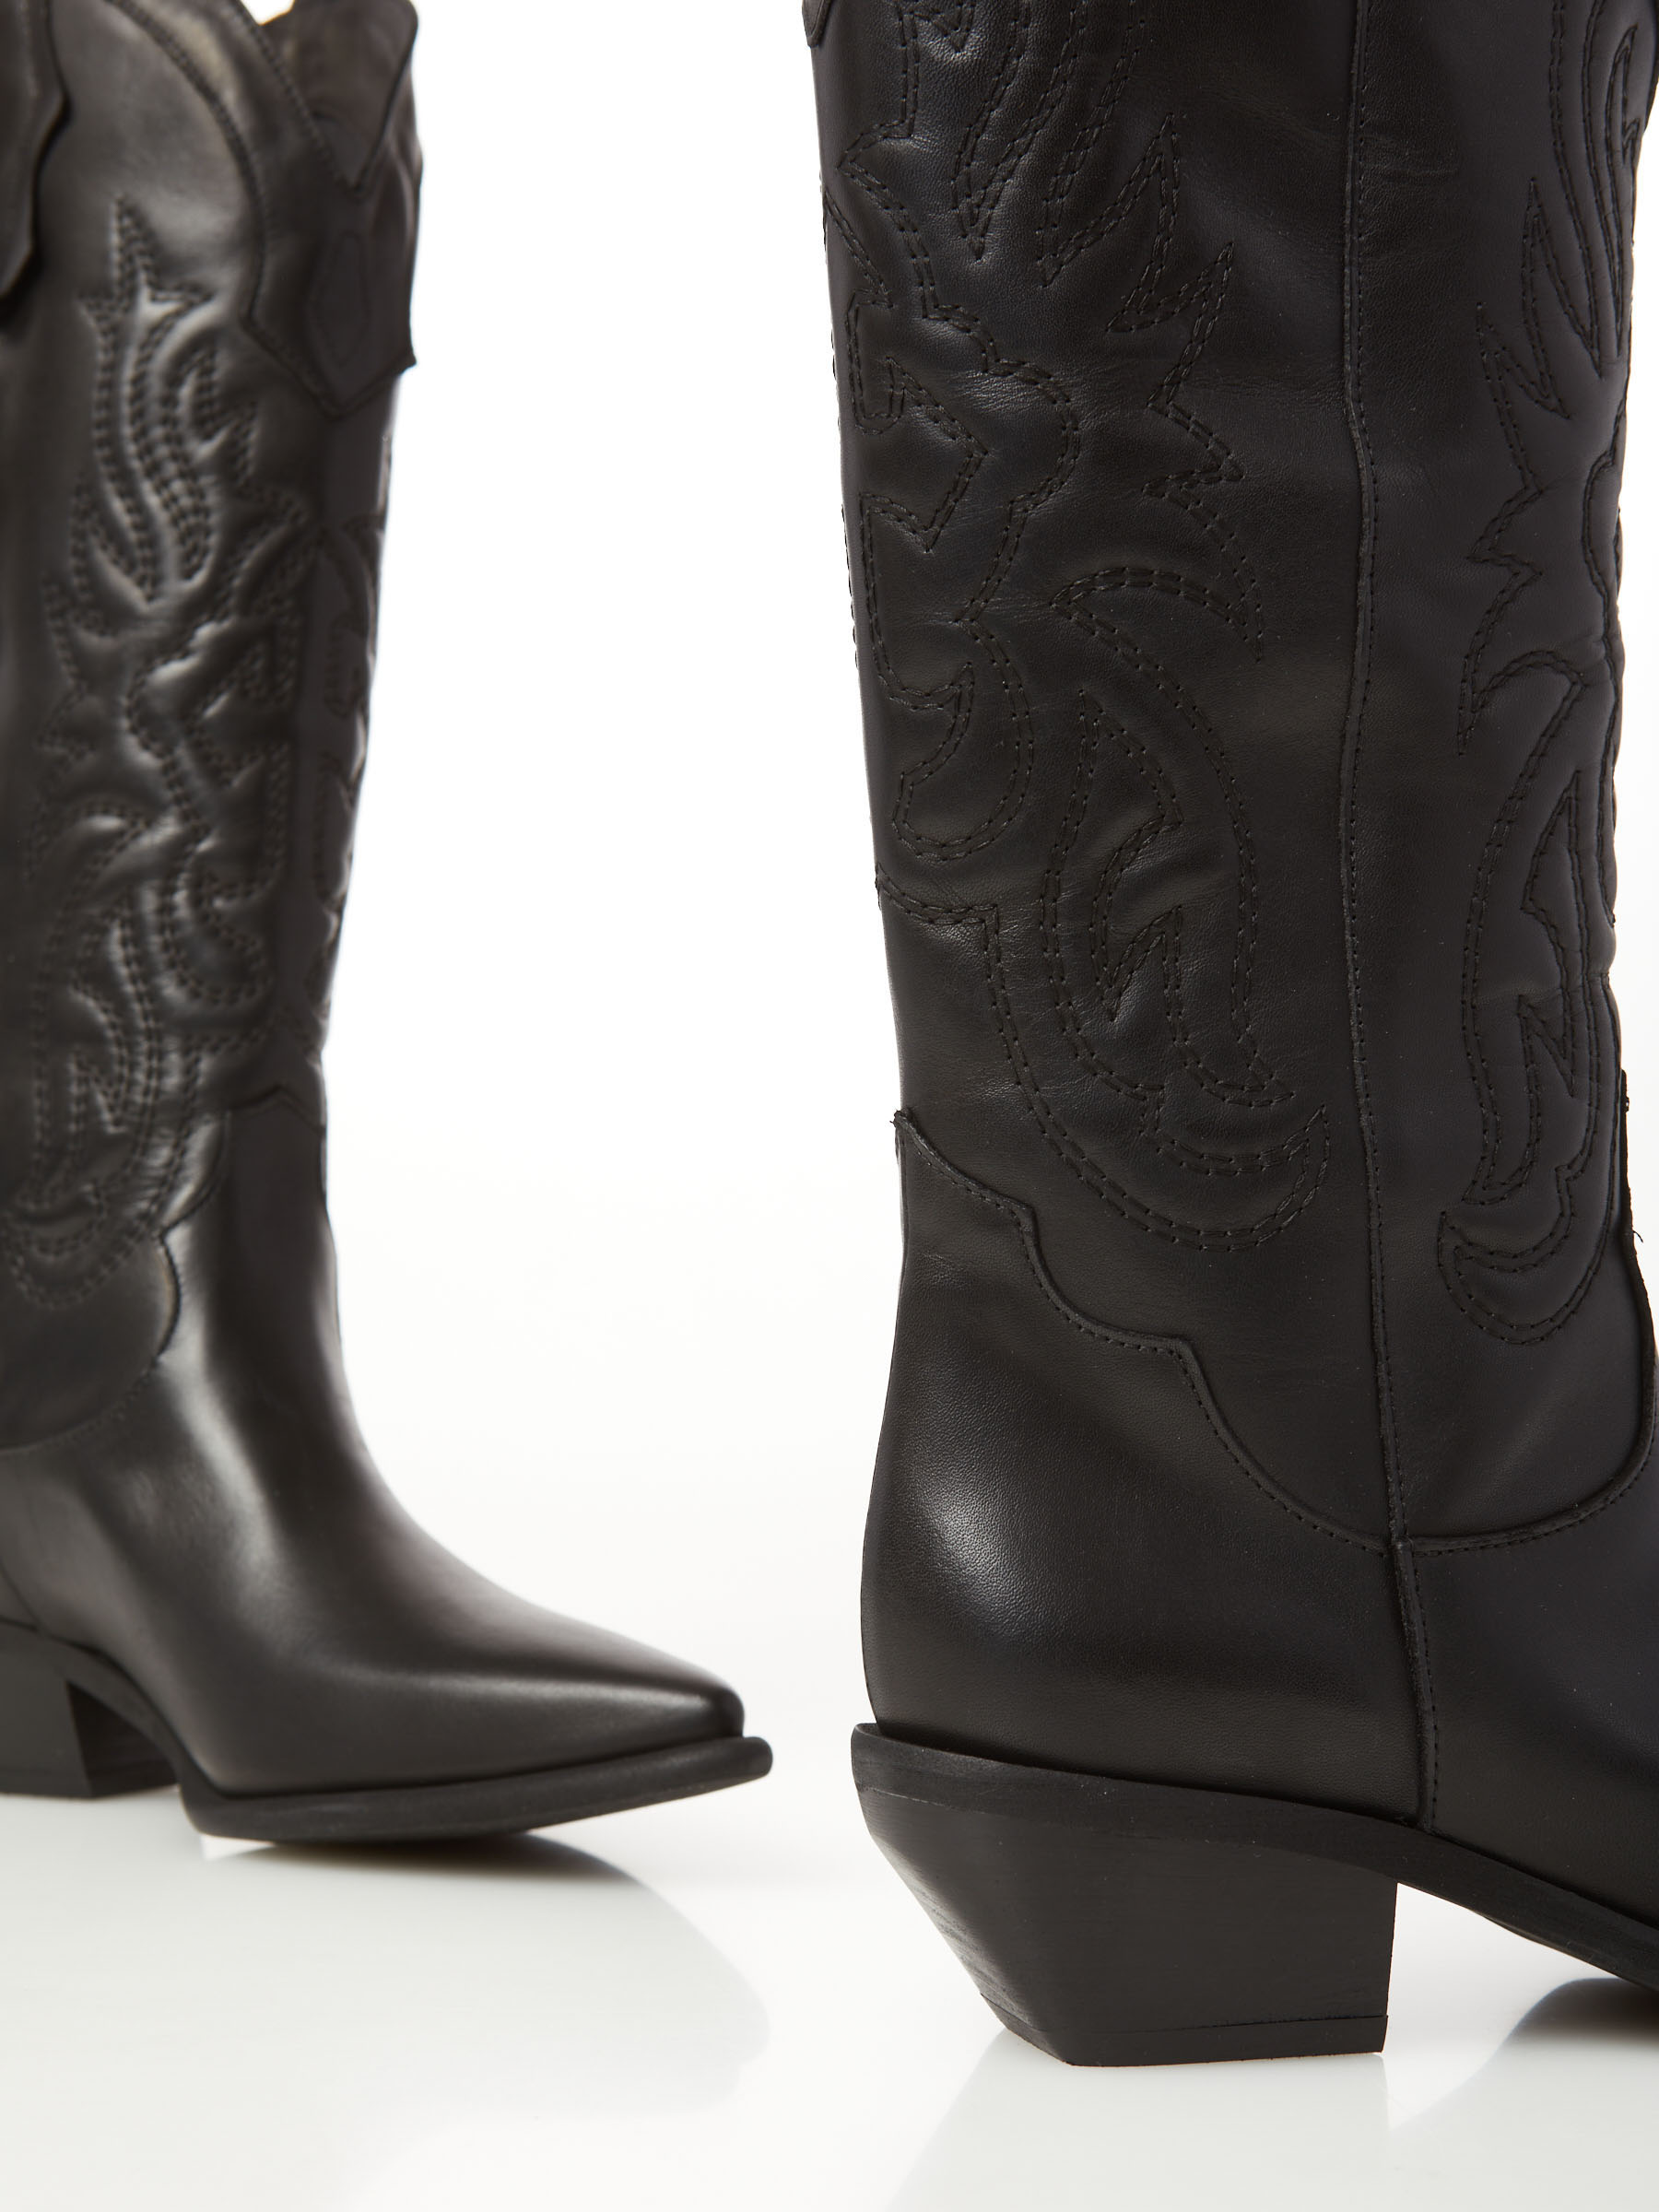 Leather Embroidered Cowboy Boot Levia